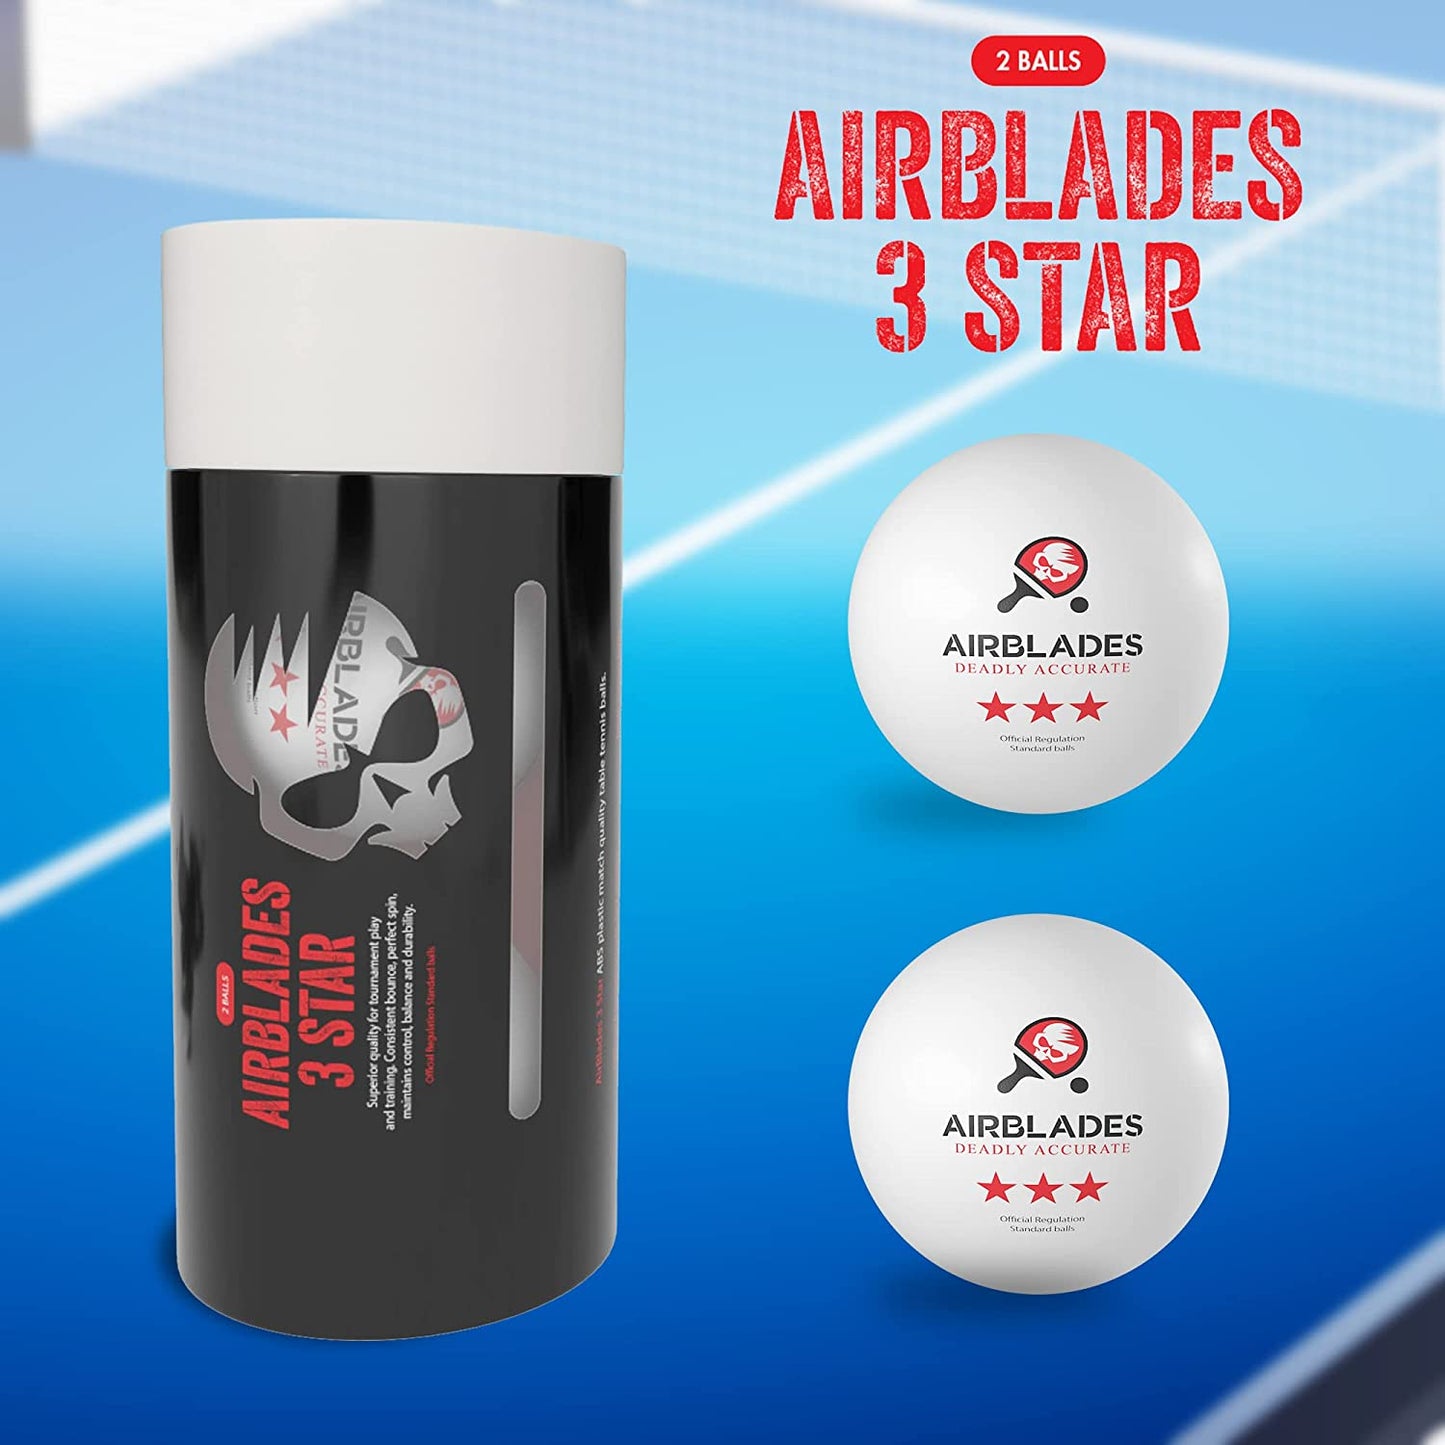 AirBlades 3 Star Ping Pong Balls | High Performance, Table Tennis Balls for Tournament Play & Training | Advanced ABS Plastic | Regulation Standard Ping Pong Balls - 2 Pack